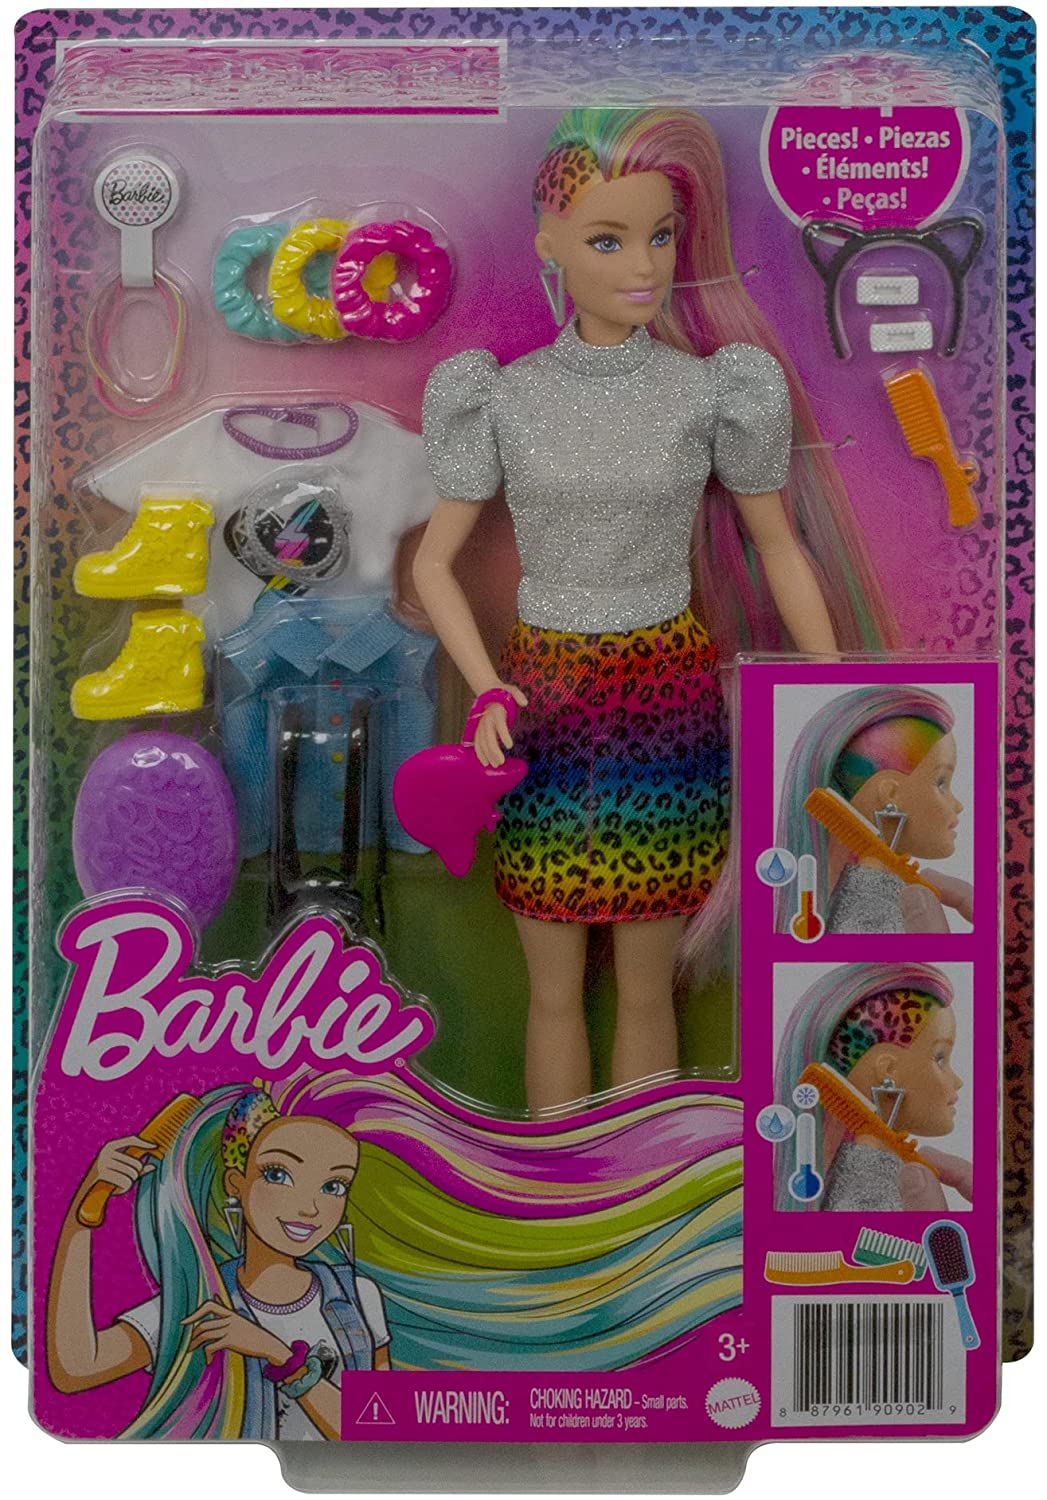 Barbie Leopard Rainbow Hair Doll (Blonde) with Color-change Hair Feature, 16 Hair & Fashion Play Accessories Including Scrunchies, Brush, Fashion Tops, Cat Ears, Cat Purse for Kids 3 to 7 Years Old